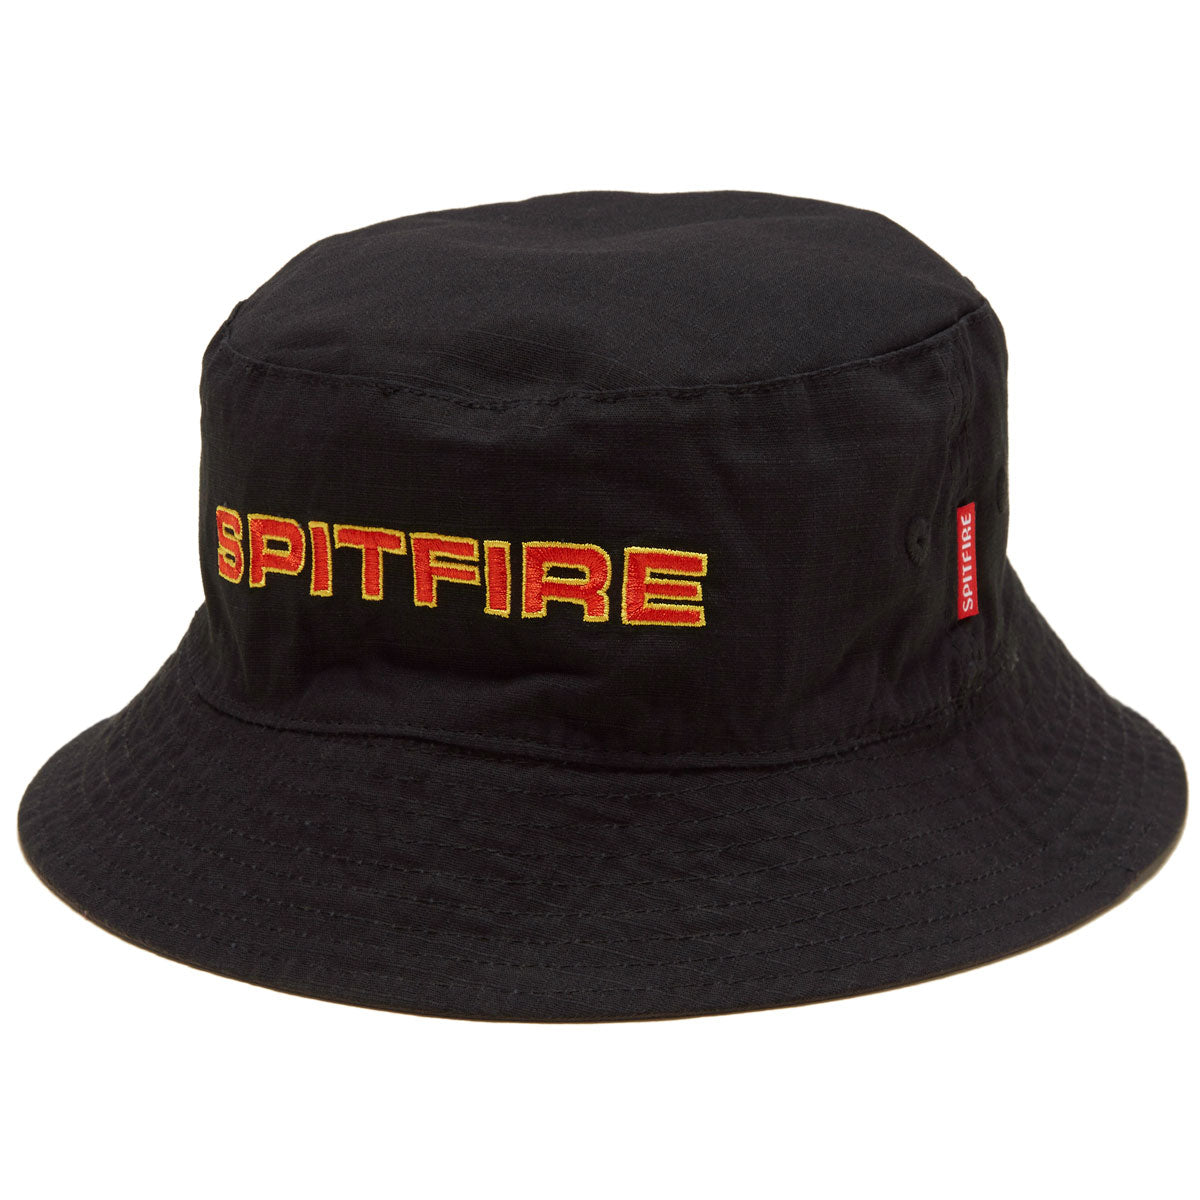 Spitfire Classic 87 Reversible Hat - Charcoal/Black image 2